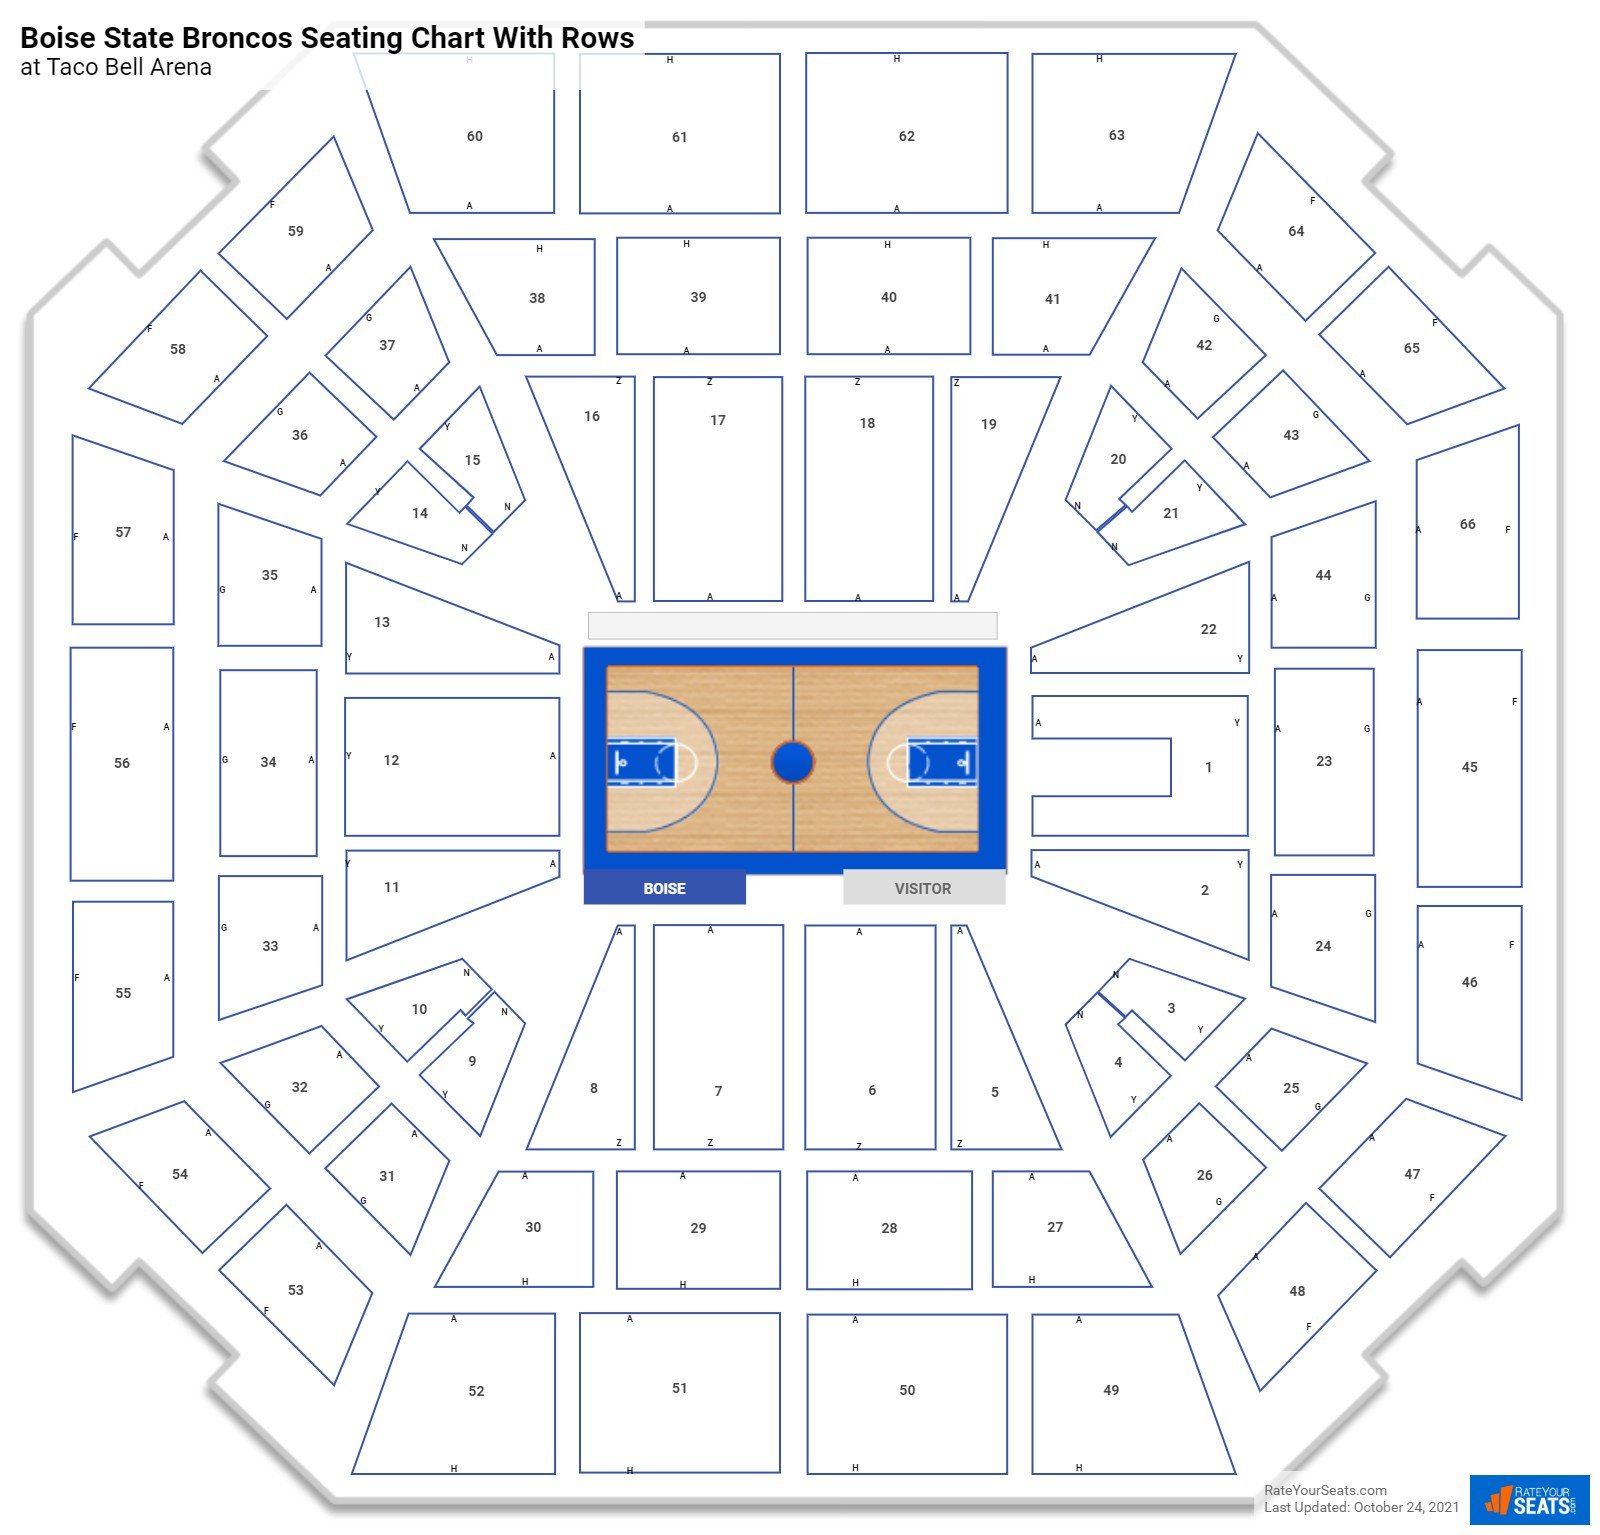 Taco Bell Arena seating chart with row numbers